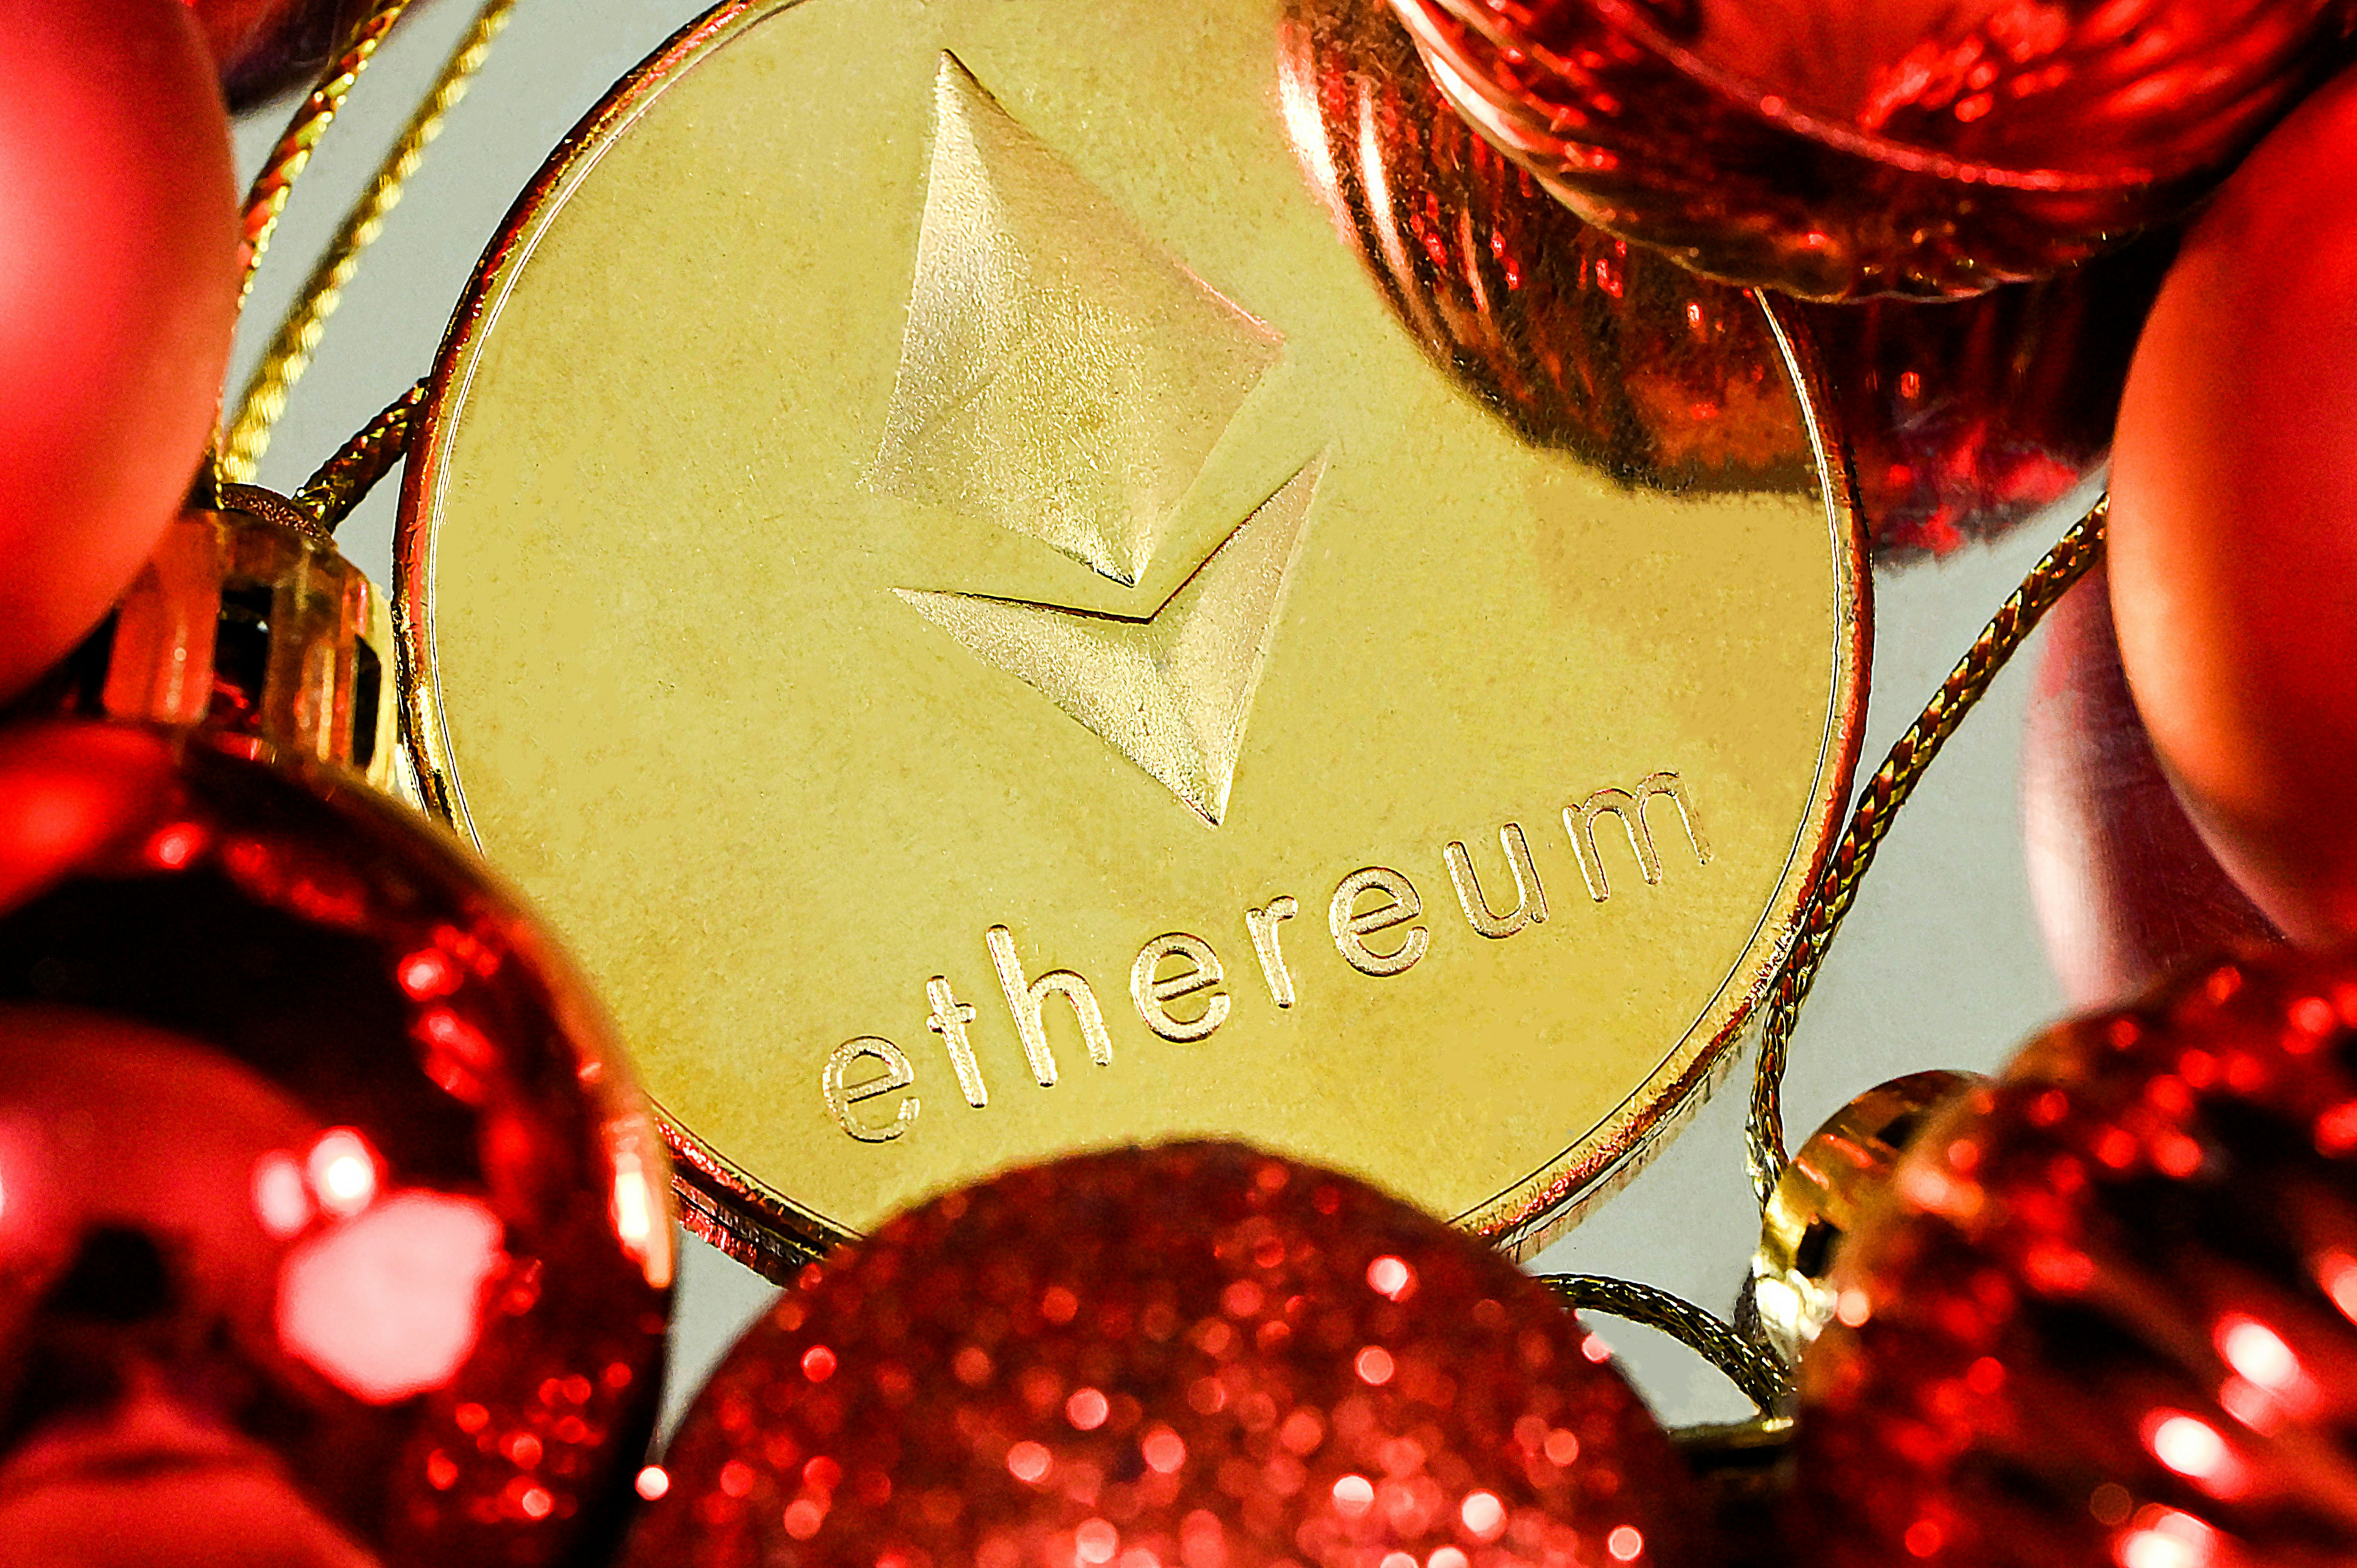 An Ethereum coin surrounded by the red balls